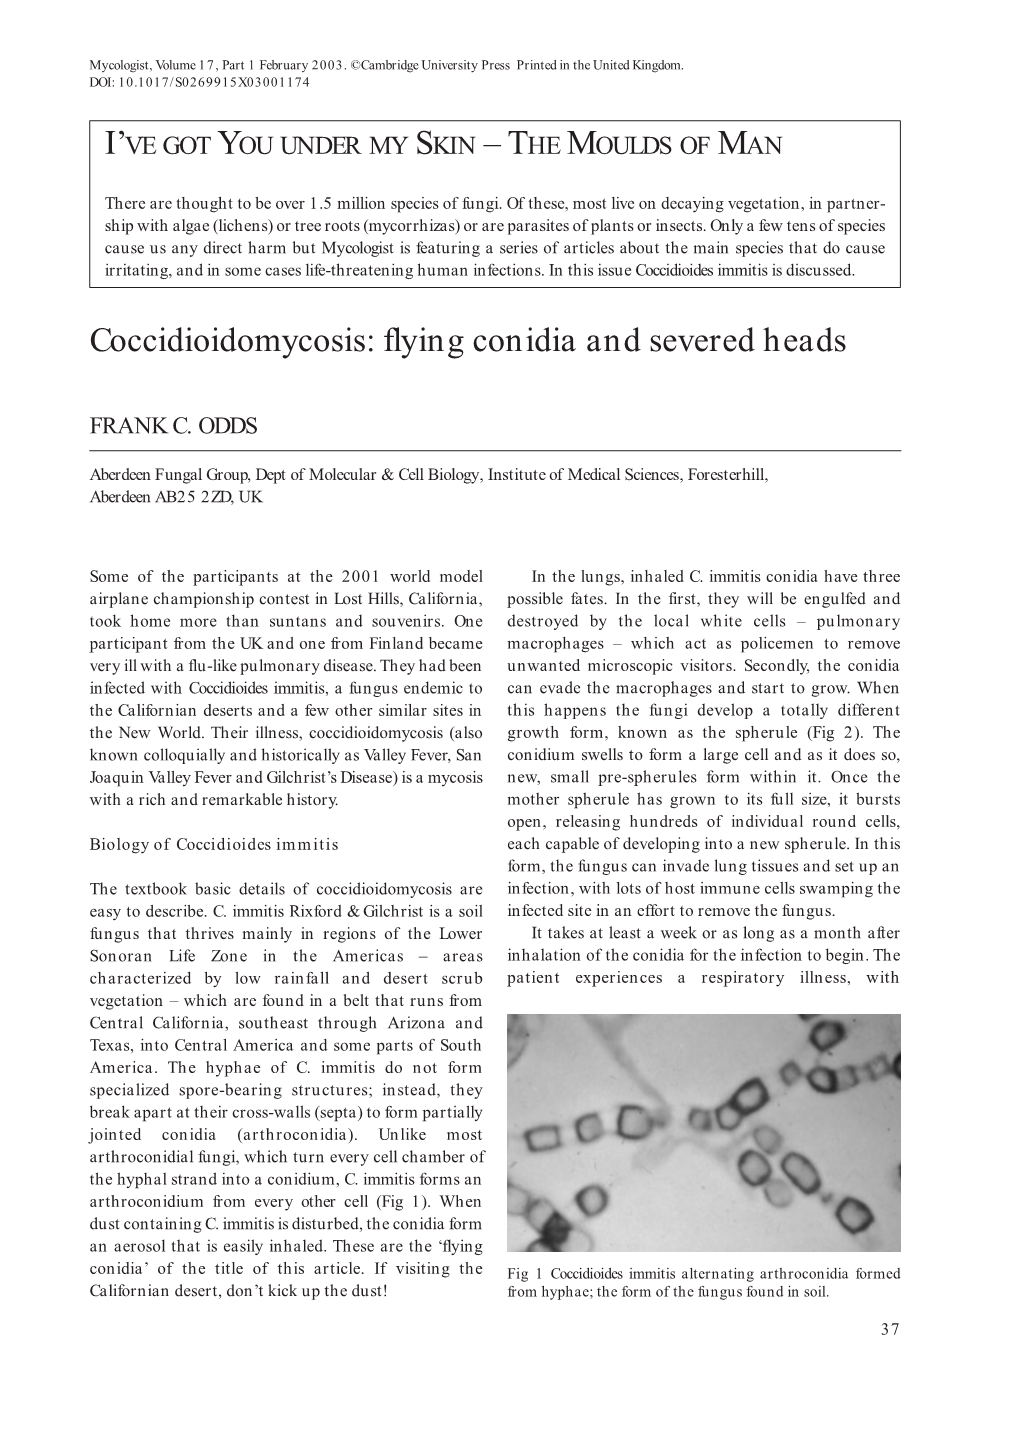 Coccidioidomycosis: Flying Conidia and Severed Heads